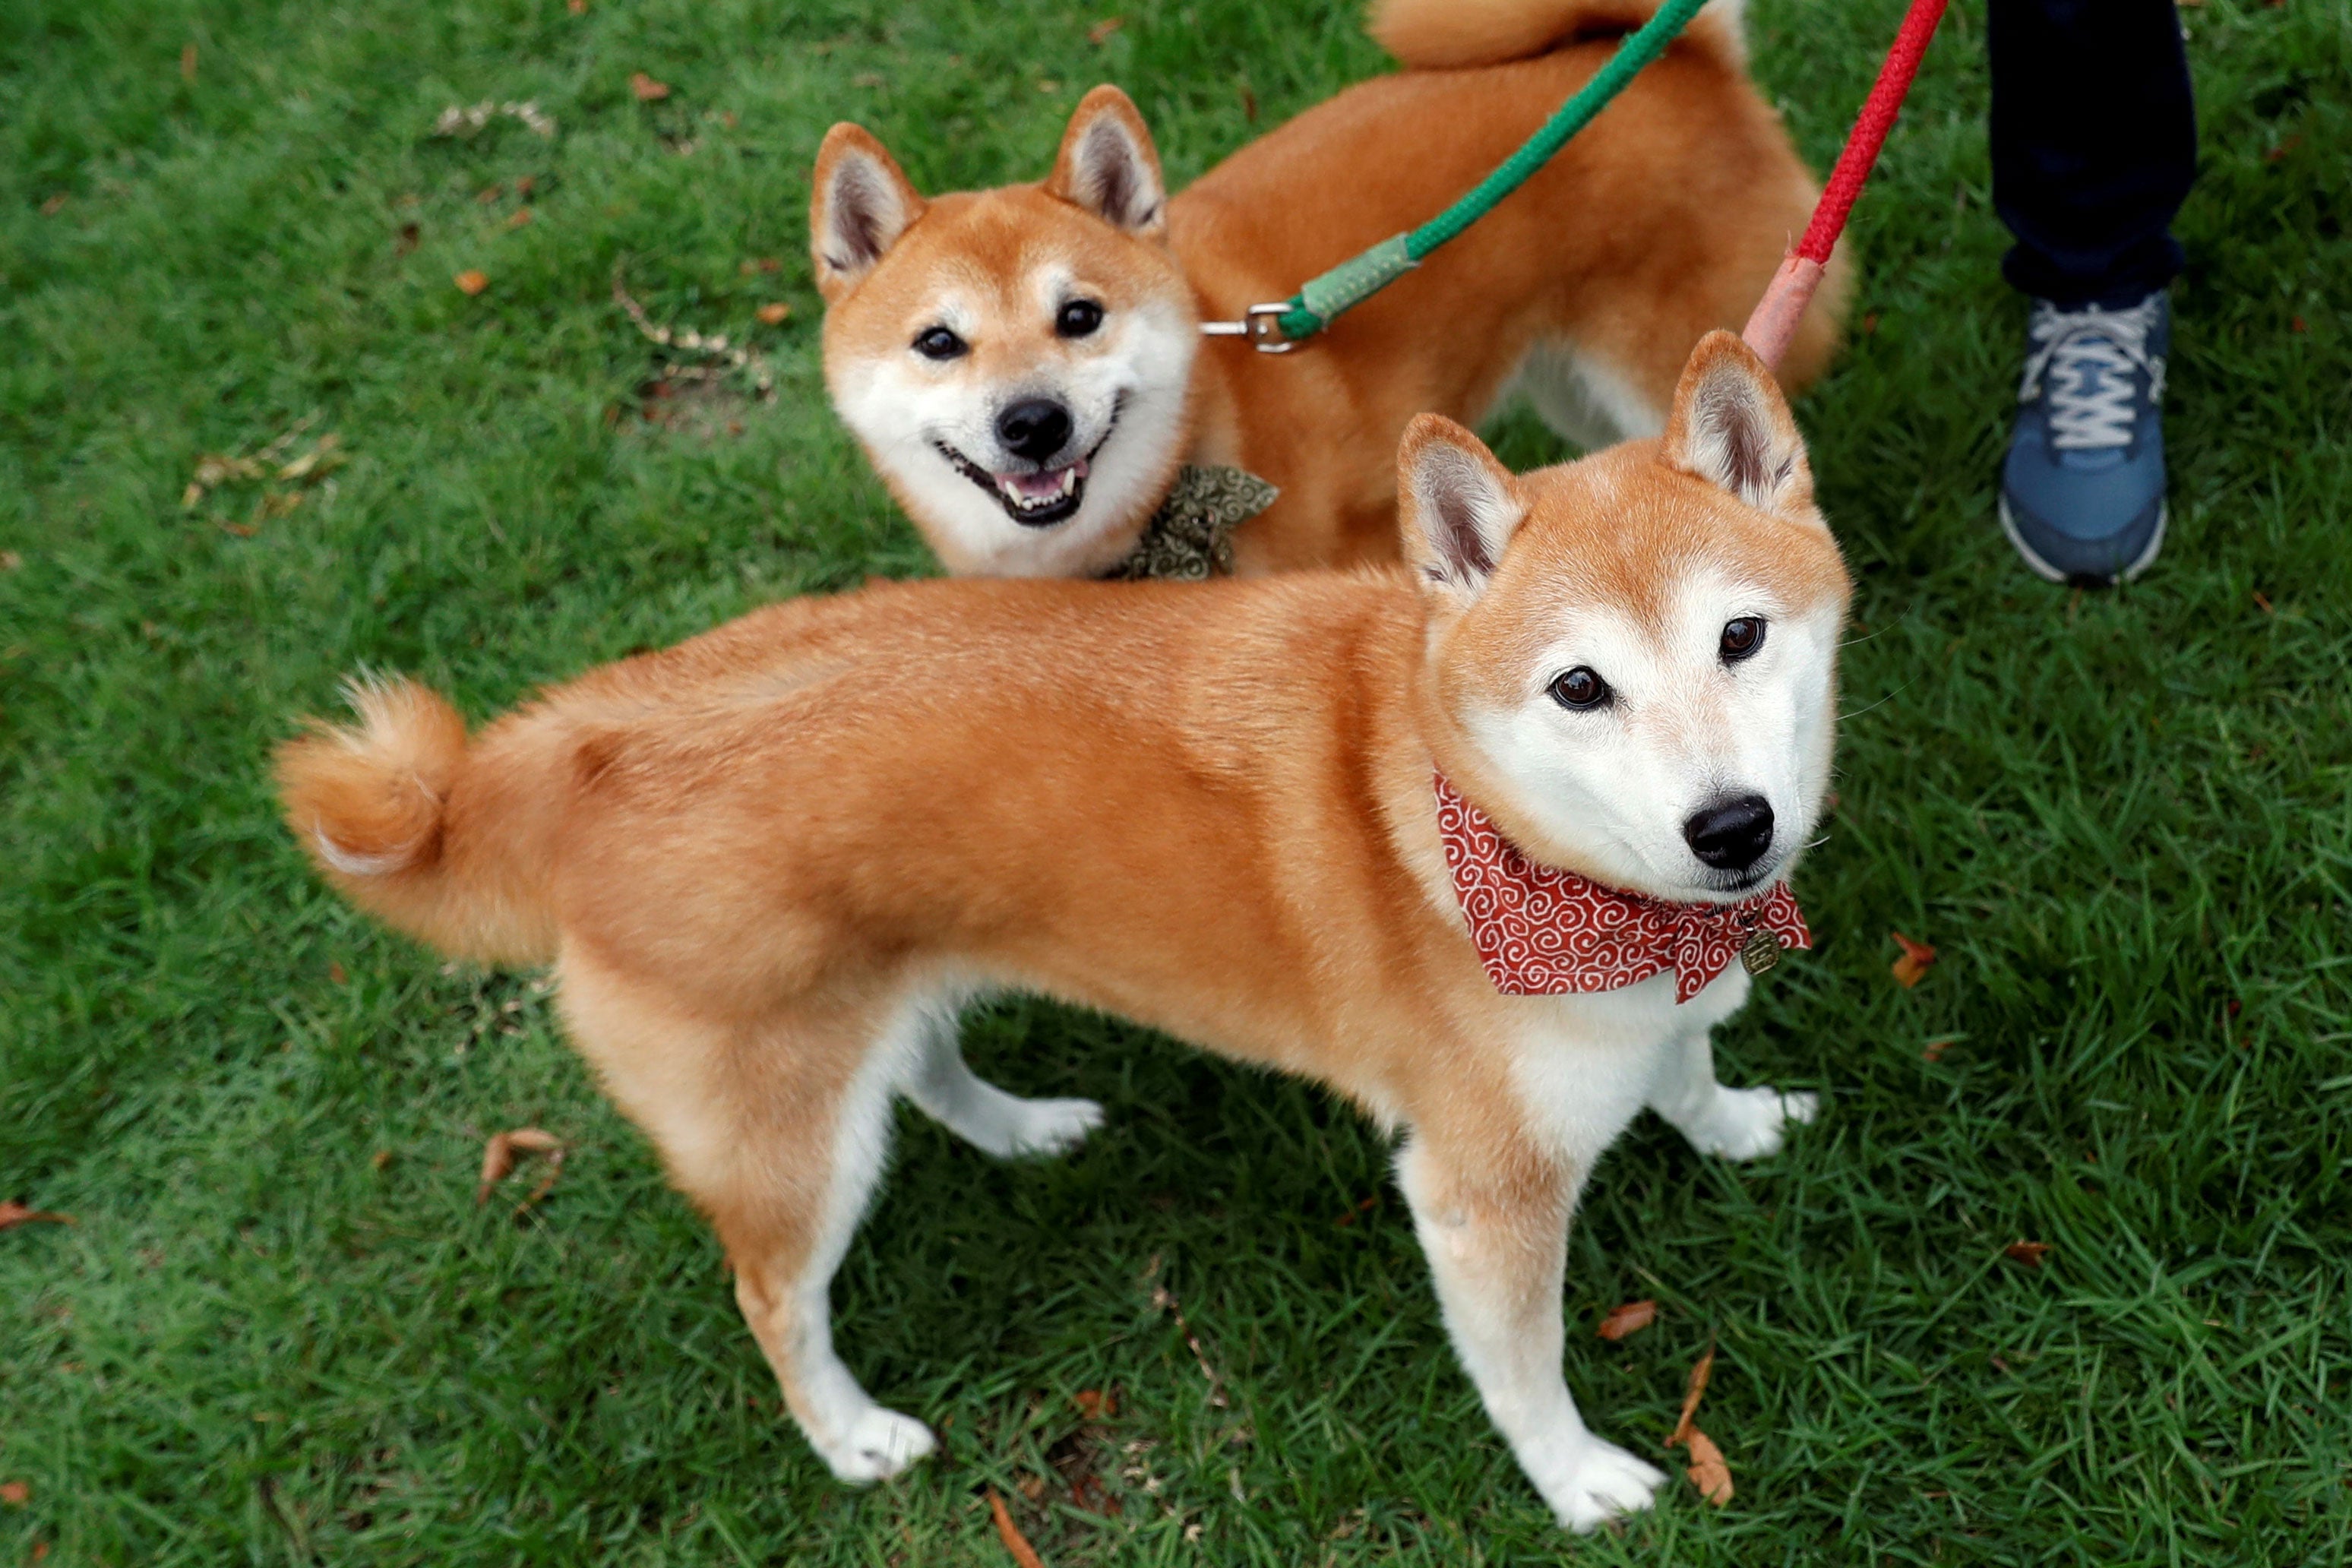 Two smiling shiba inus on leashes stand on grass